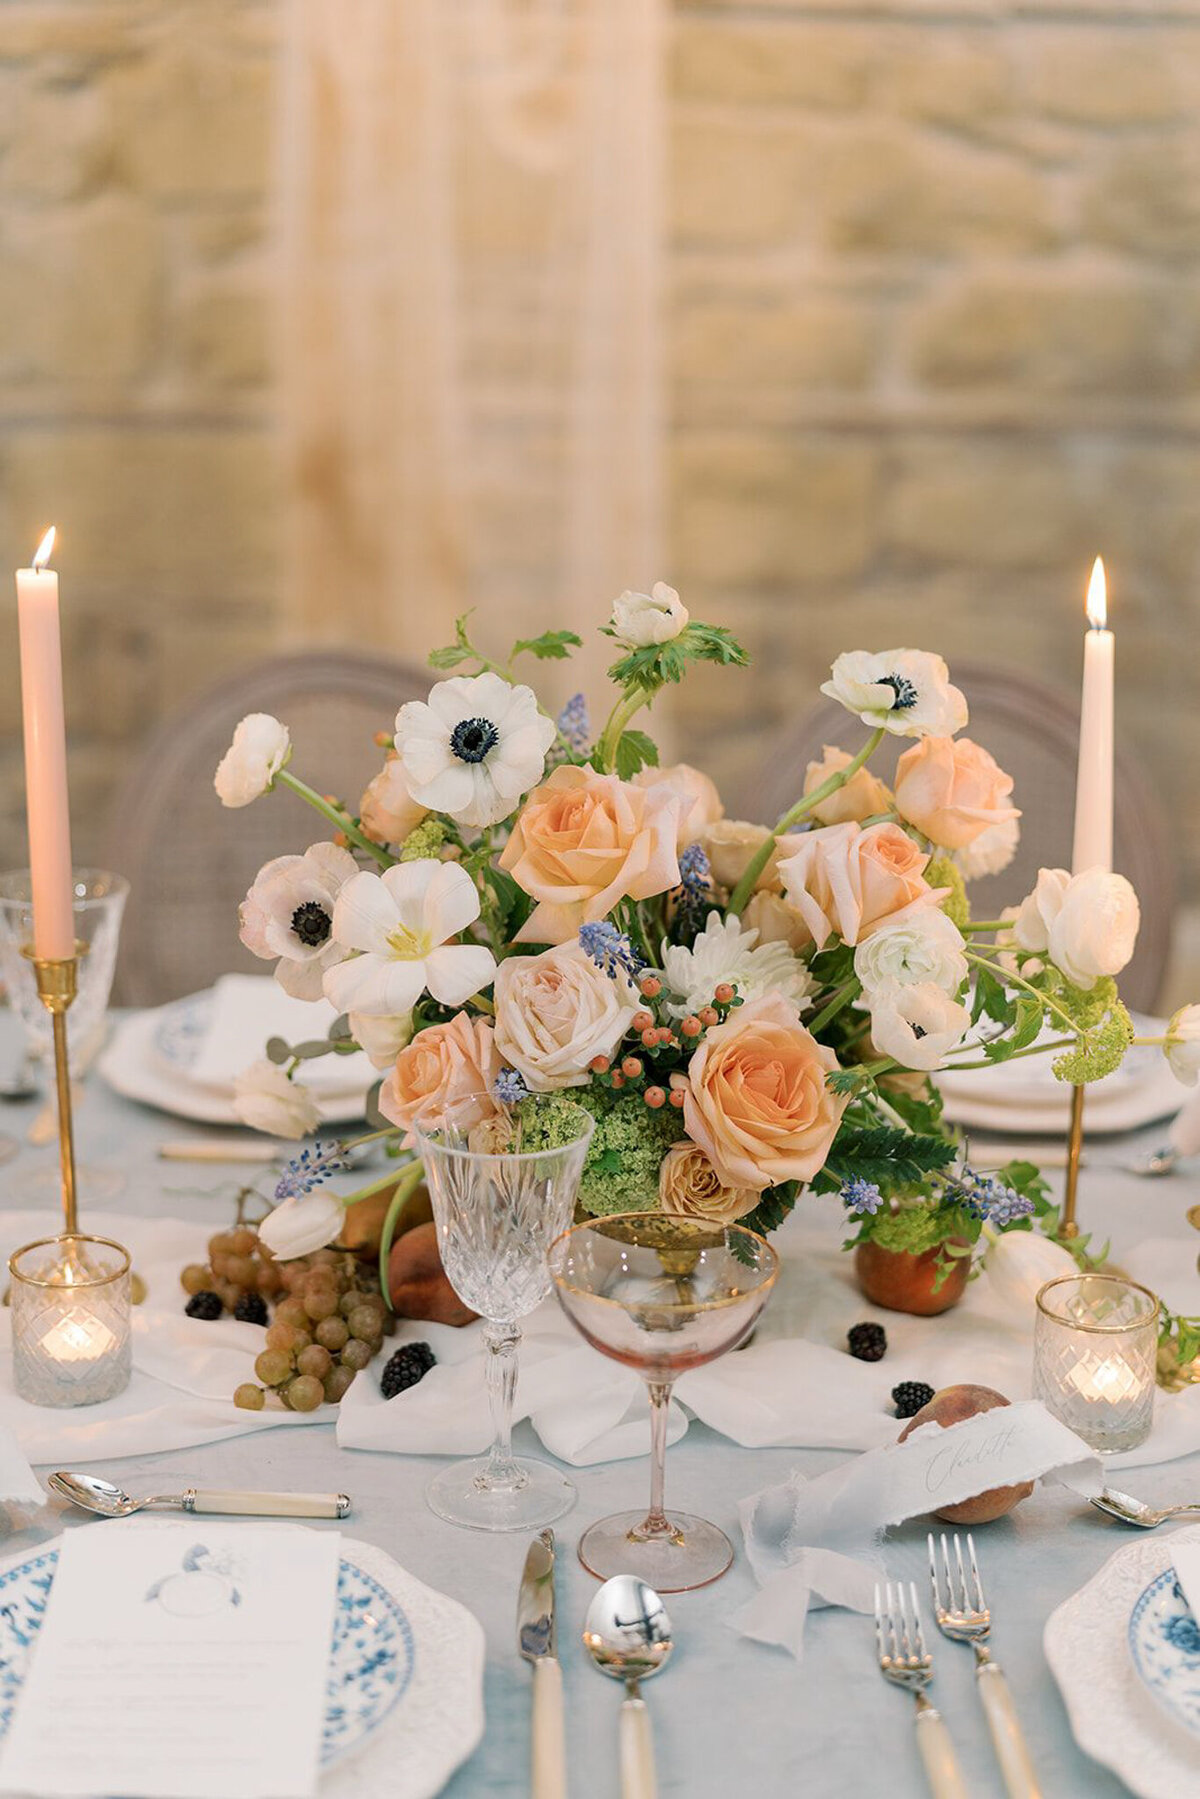 Peach, white and lavender floral centrepiece by Hue Florals, artistic Calgary, Alberta wedding florist, featured on the Brontë Bride Vendor Guide.